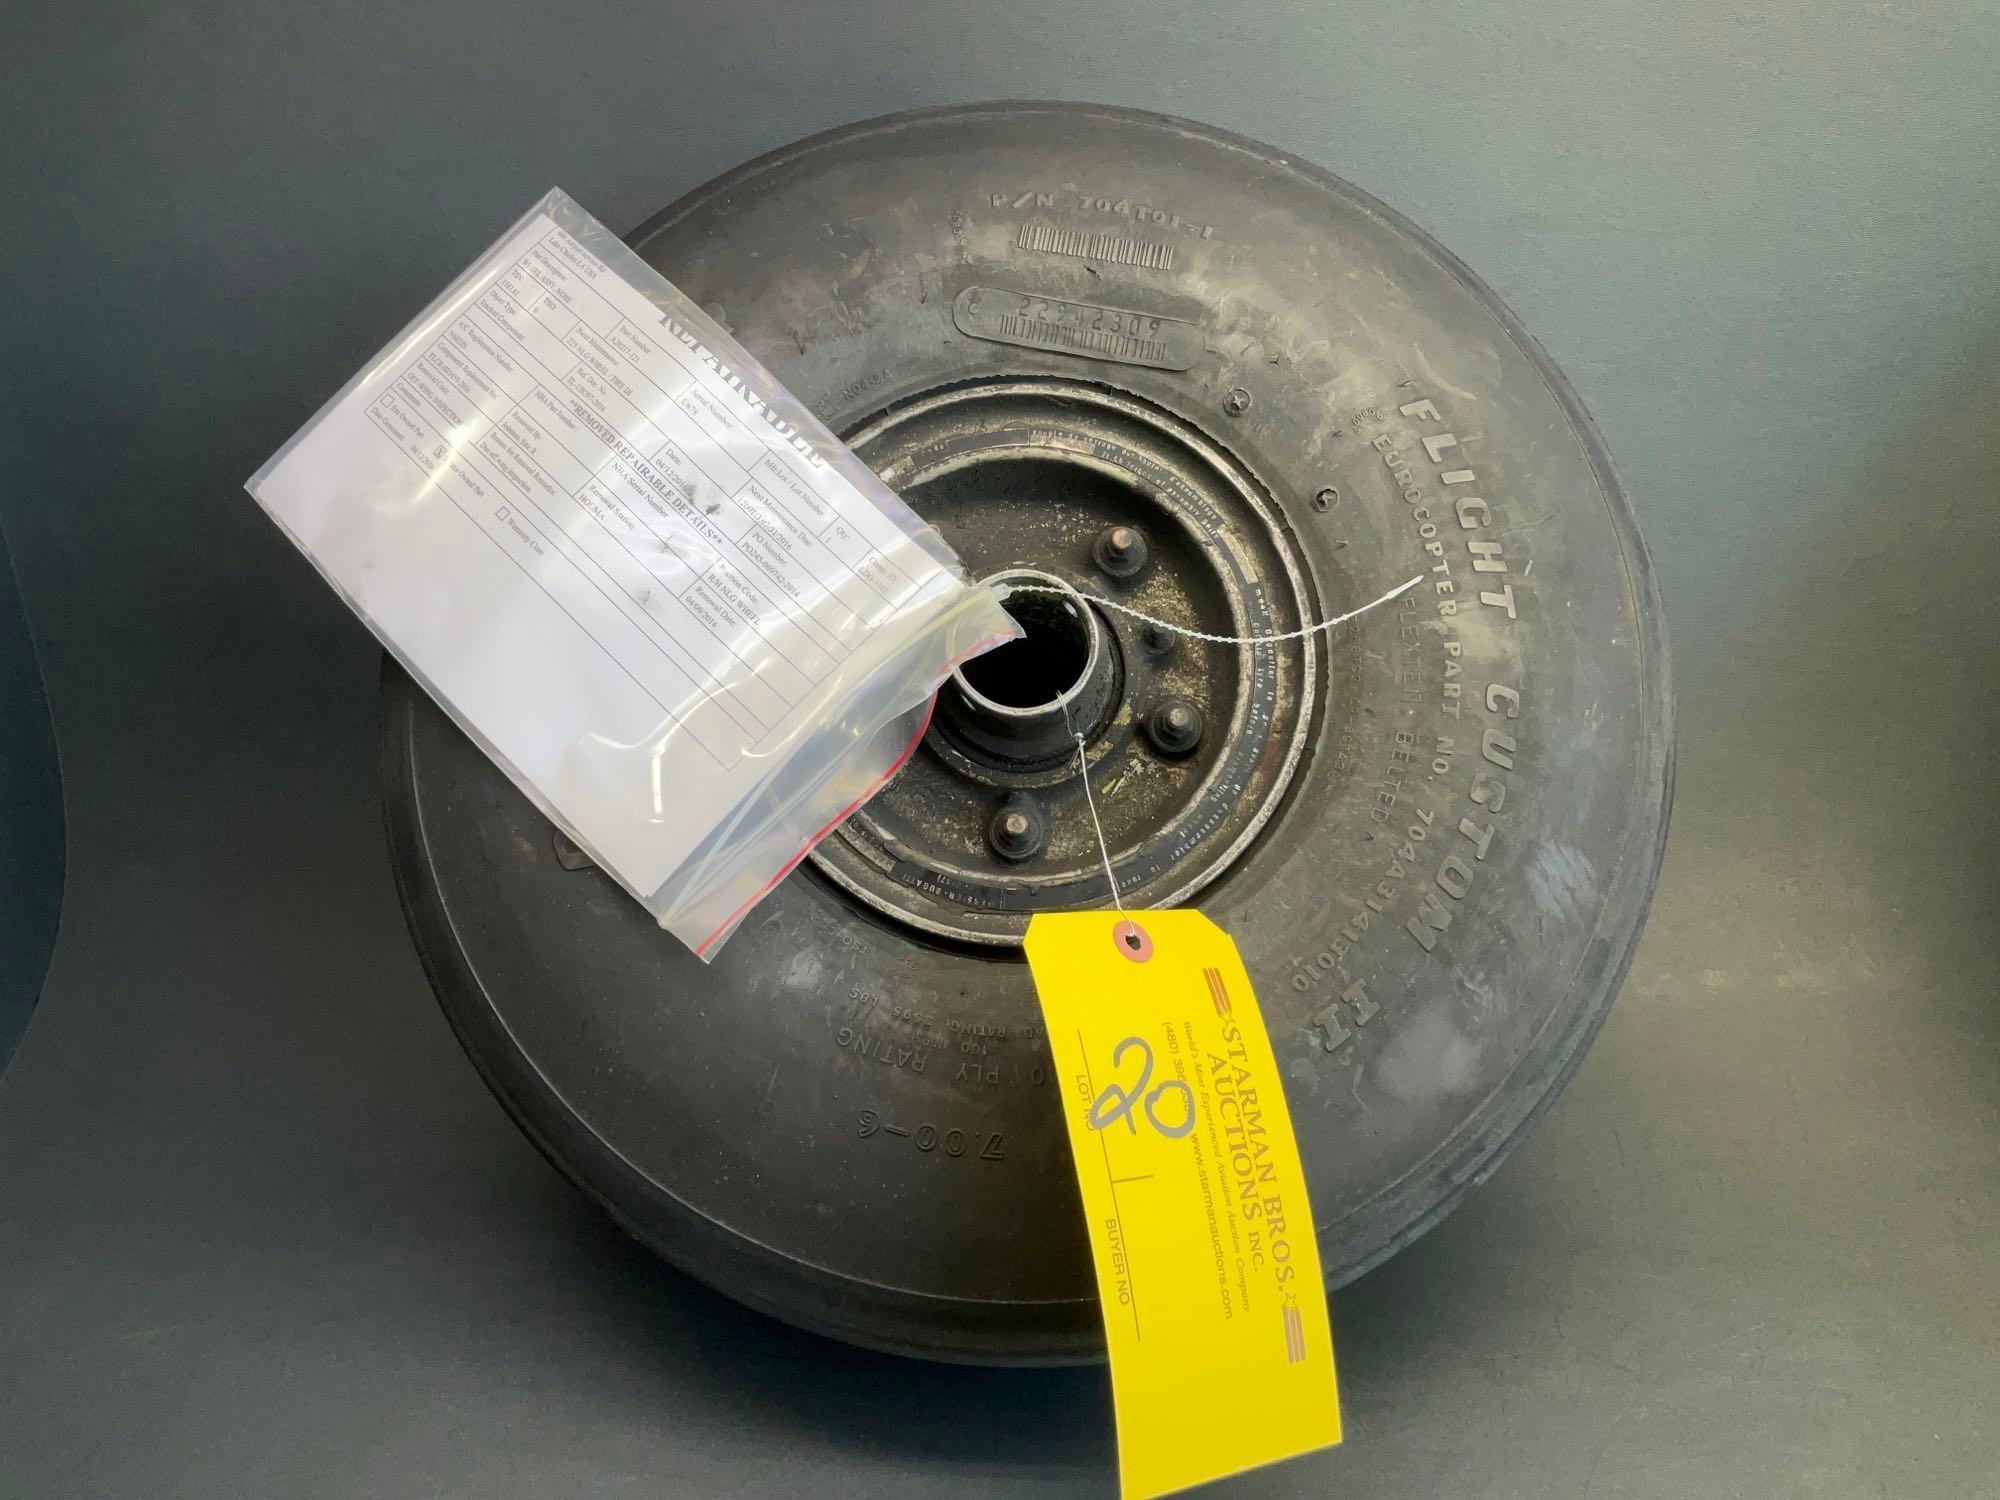 NOSE WHEEL ASSYS C20525000, A20217-121 (2 REMOVED FOR INSPECTION, 1 NO PAPERWORK)